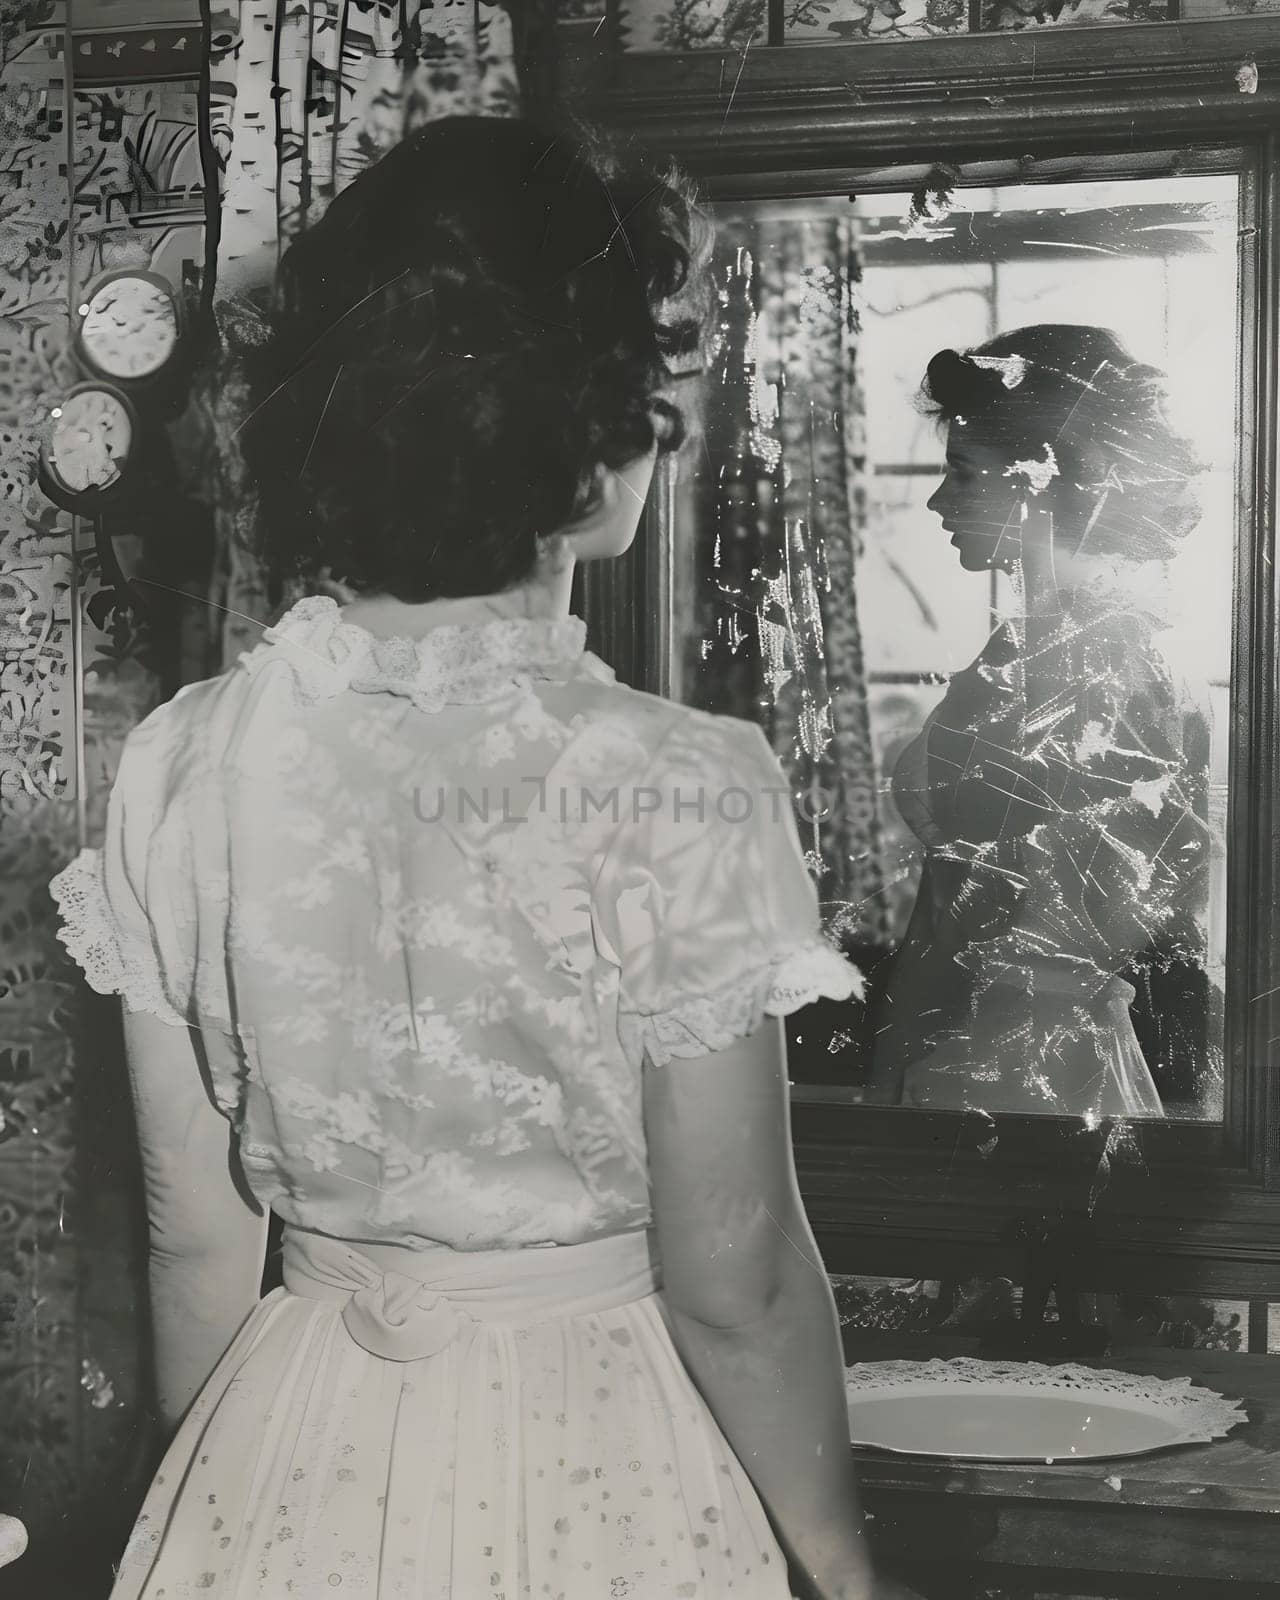 A woman in vintage clothing is examining her reflection in a blackandwhite monochrome photography art room, admiring the intricate pattern of her shoulder sleeve design